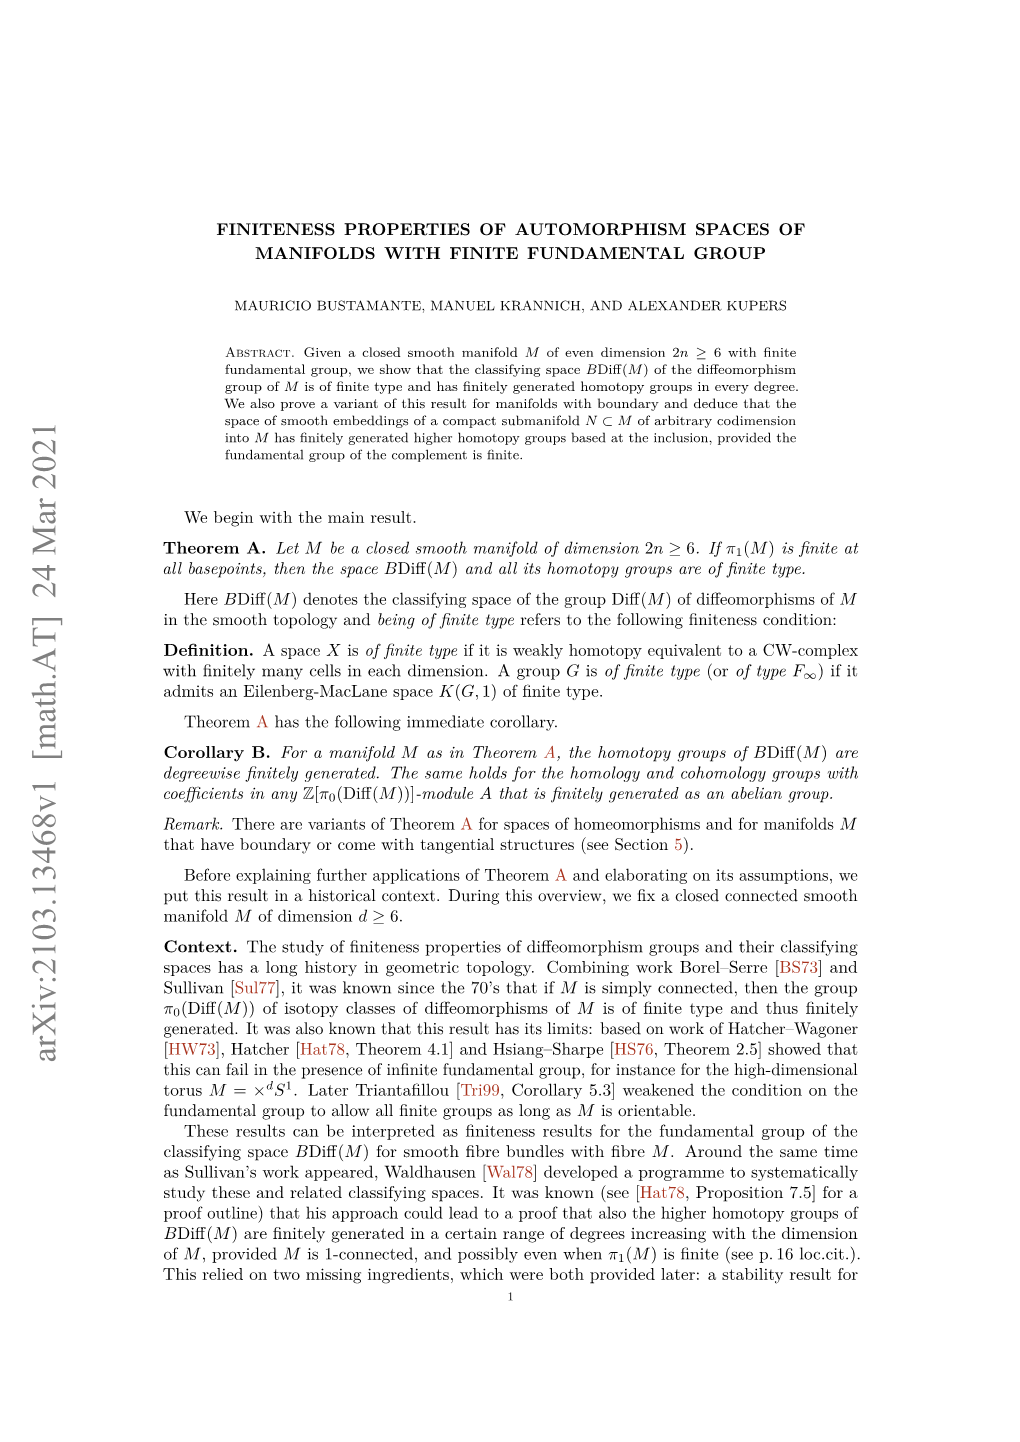 Finiteness Properties of Automorphism Spaces of Manifolds with Finite Fundamental Group